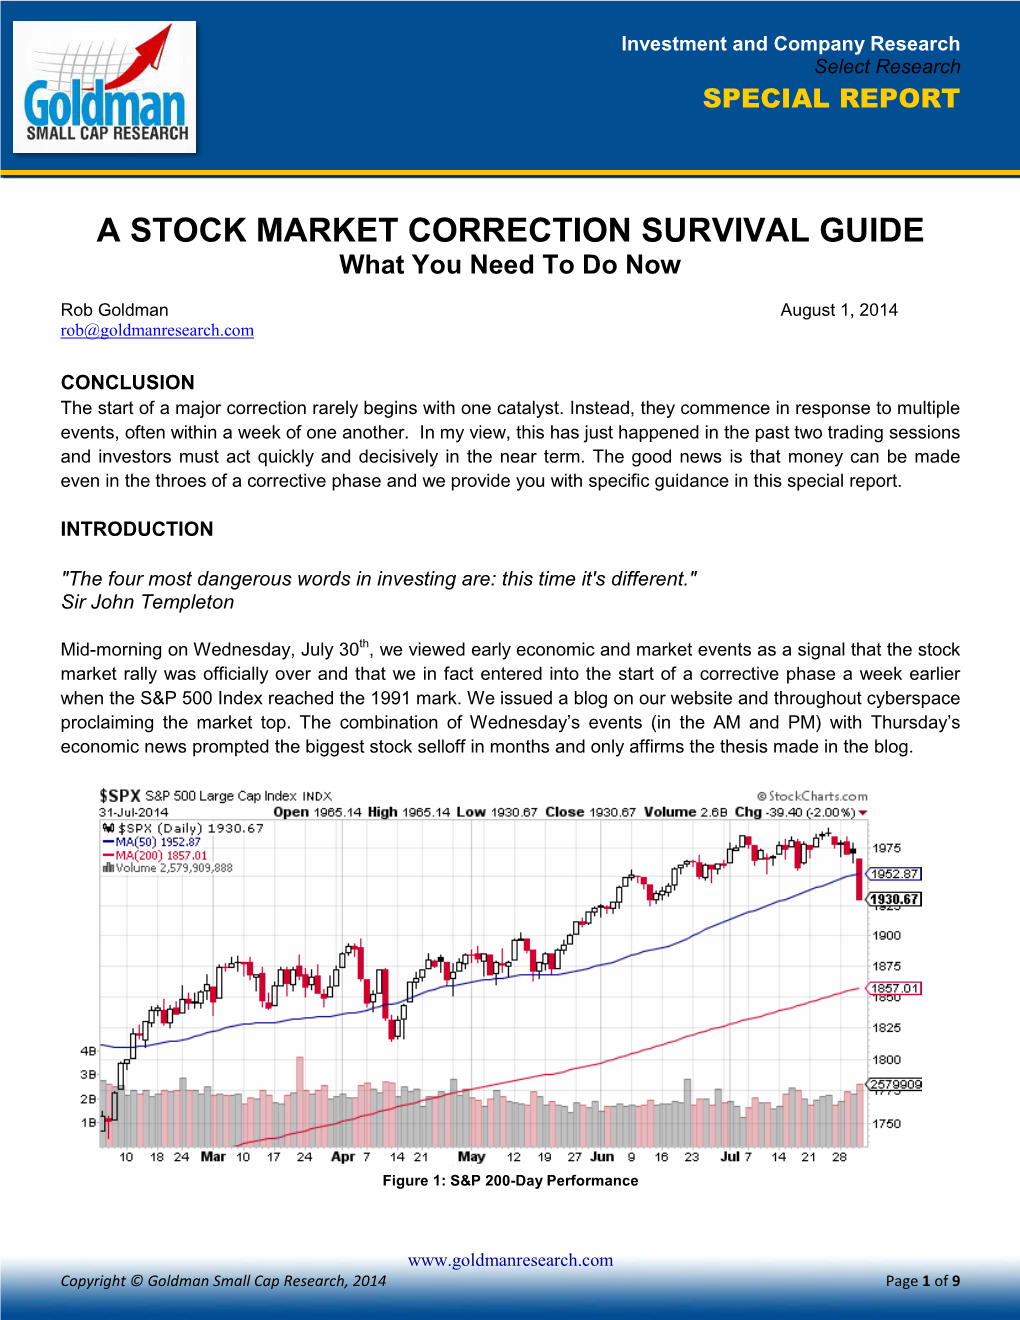 A STOCK MARKET CORRECTION SURVIVAL GUIDE What You Need to Do Now